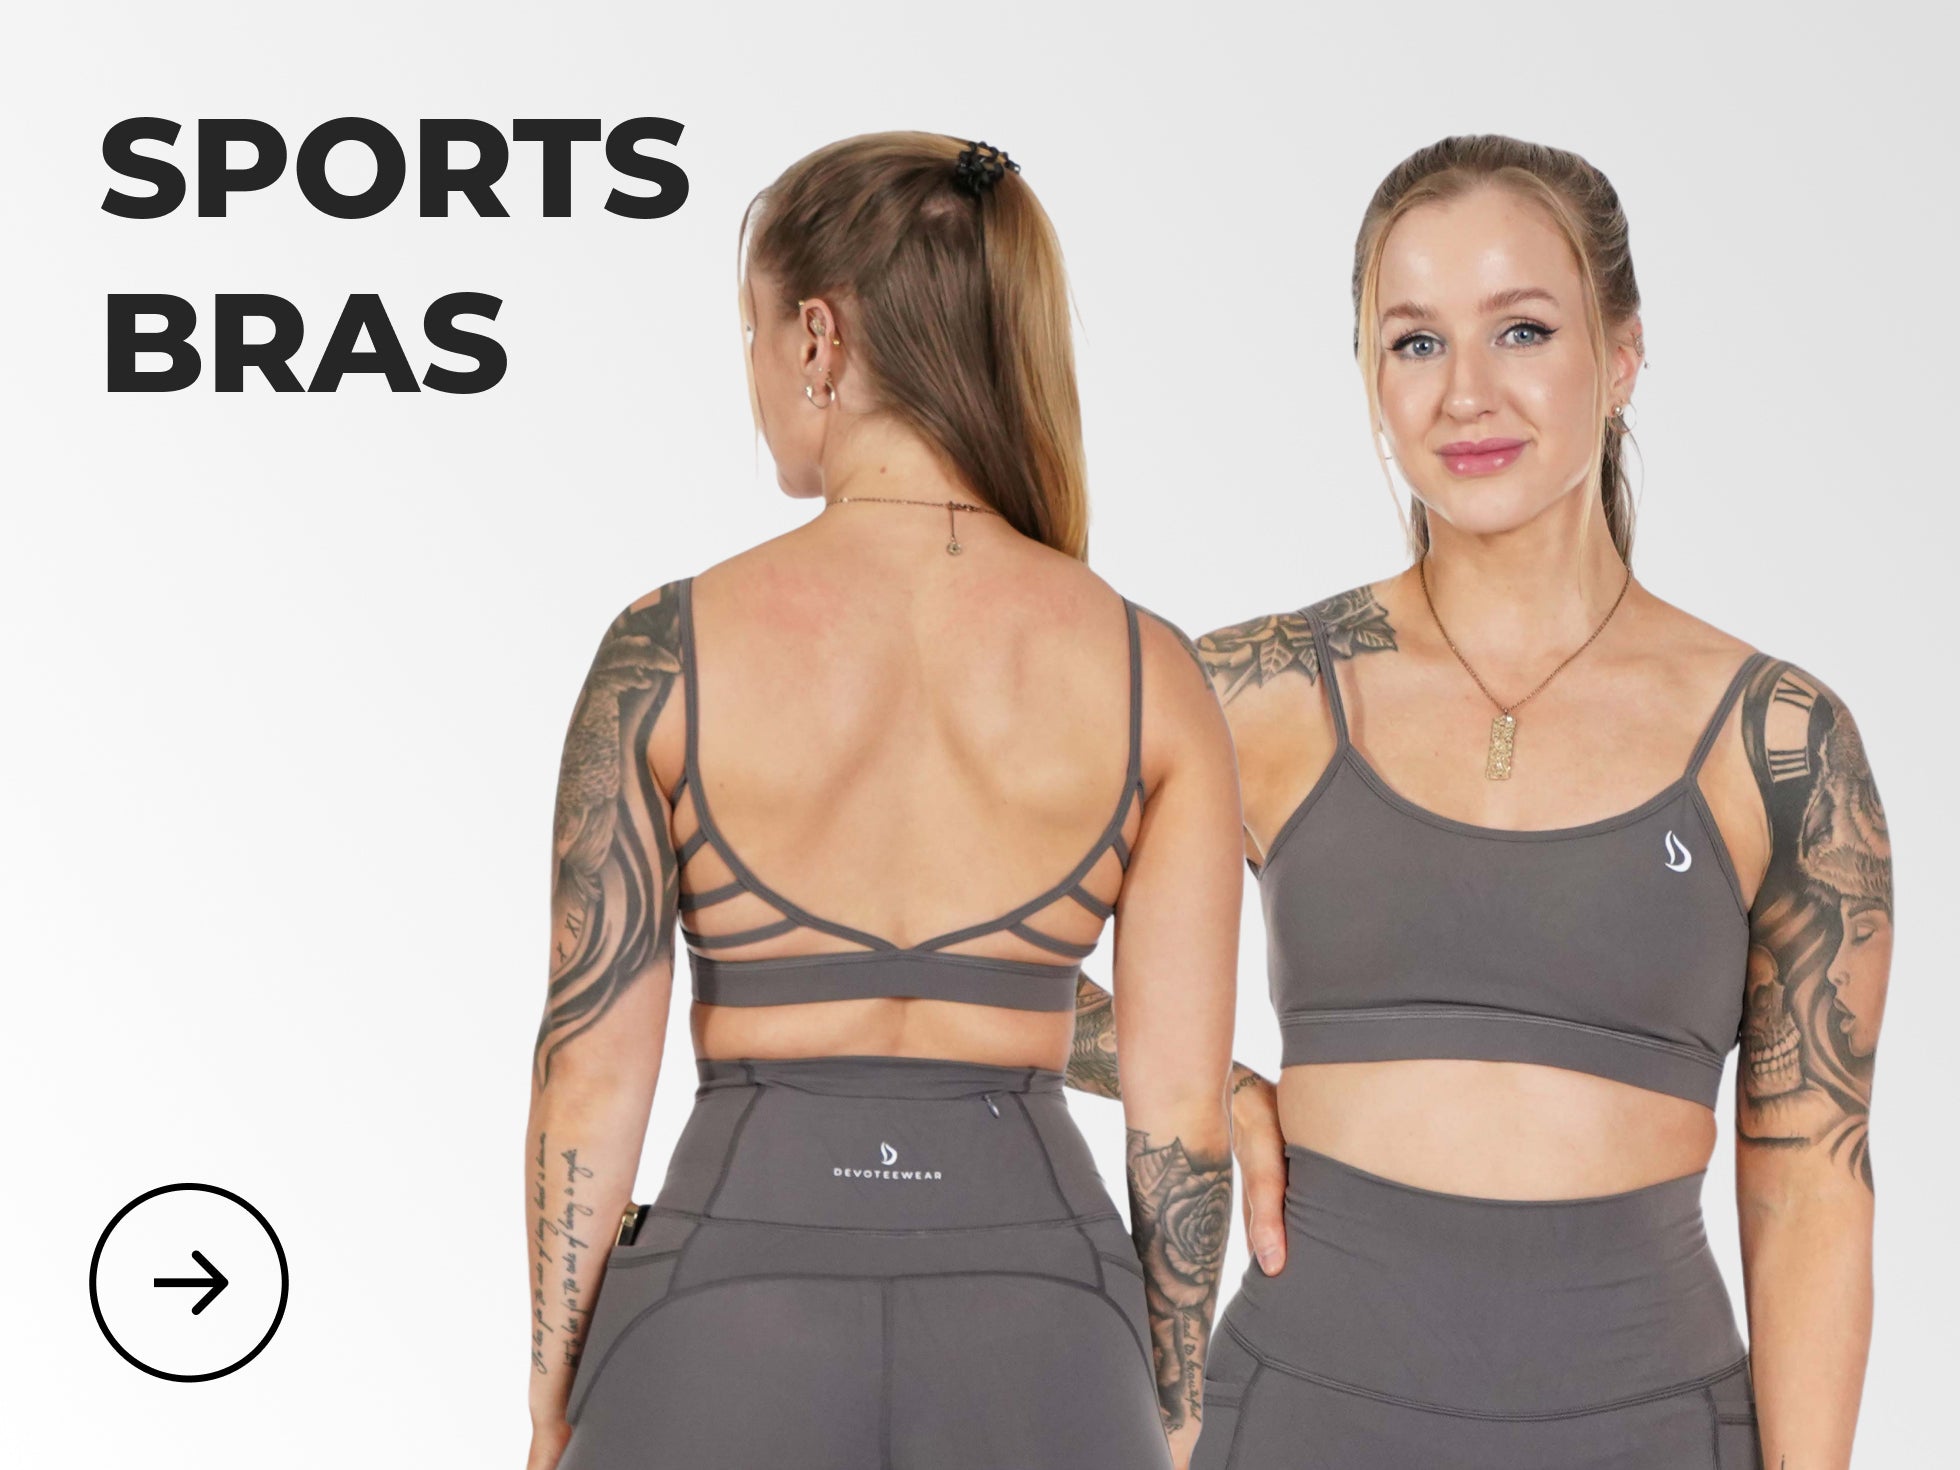 Devoteewear's cutest sports bras with strappy back and low support. Best sports bras for women for gym and back day.